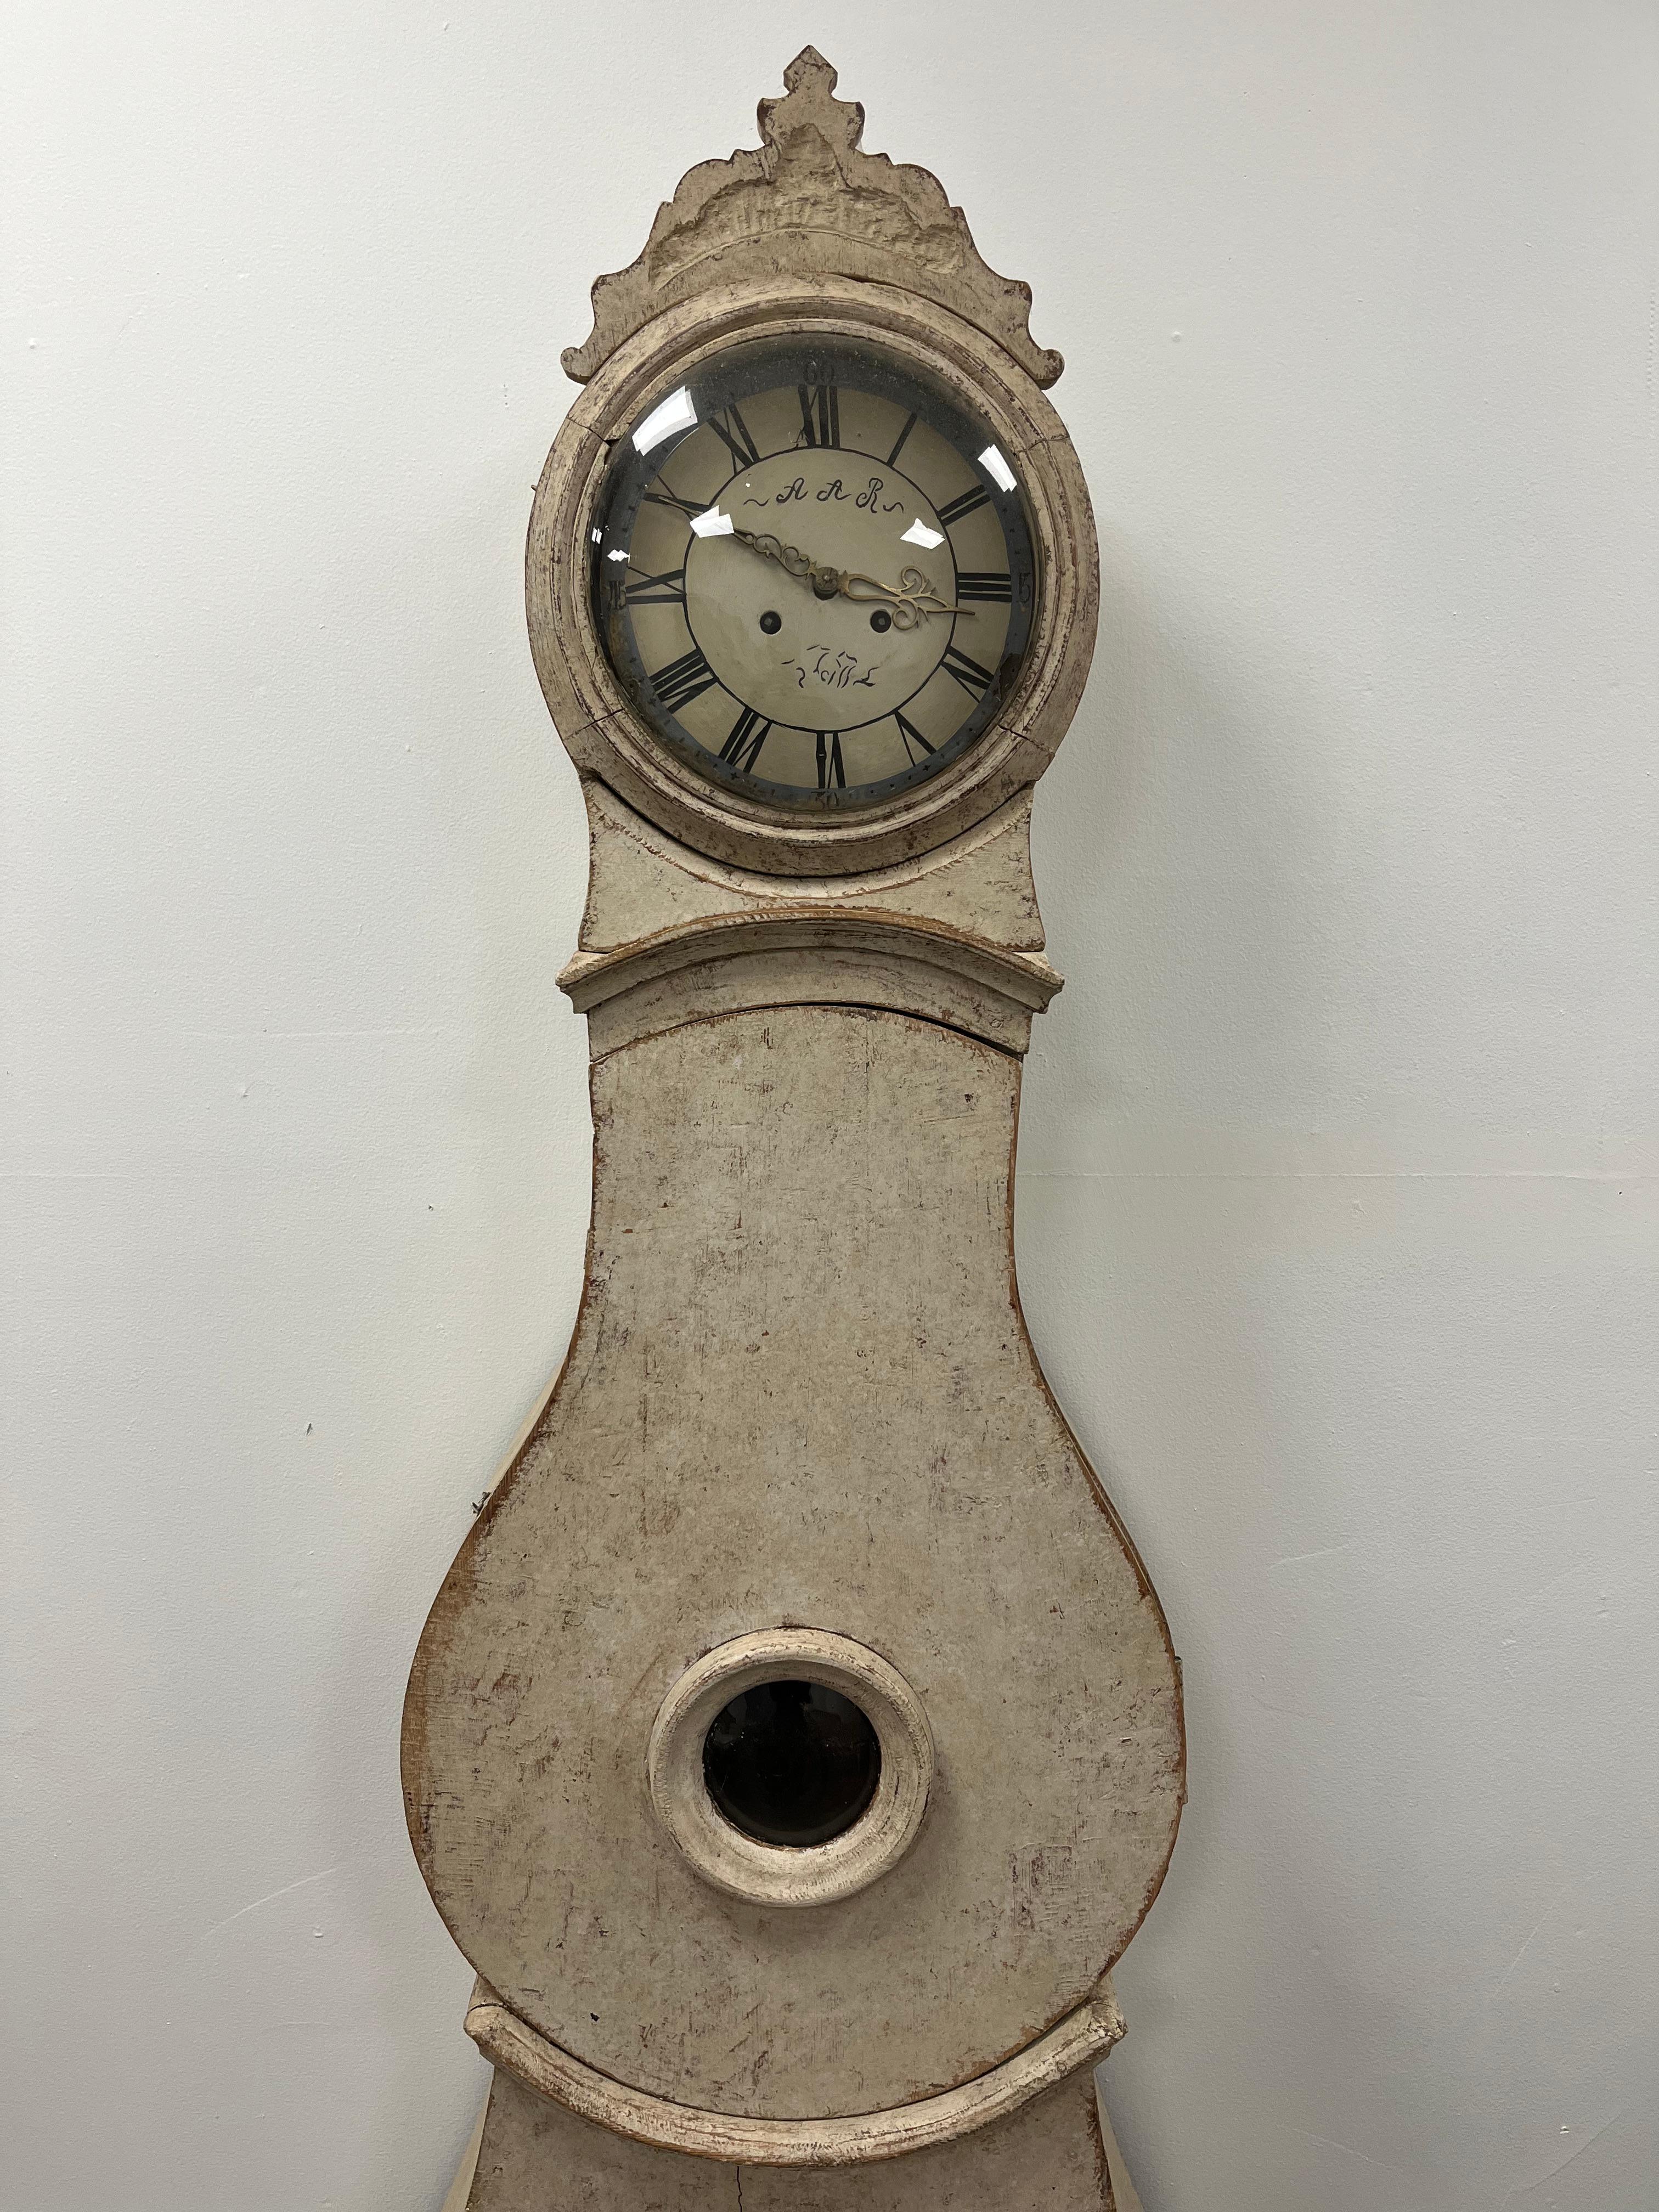 A unique Swedish case clock repainted in cream color. Clock is sold as a decorative piece, no mechanical guarantee. Weights (but no pendulum and key) included.
